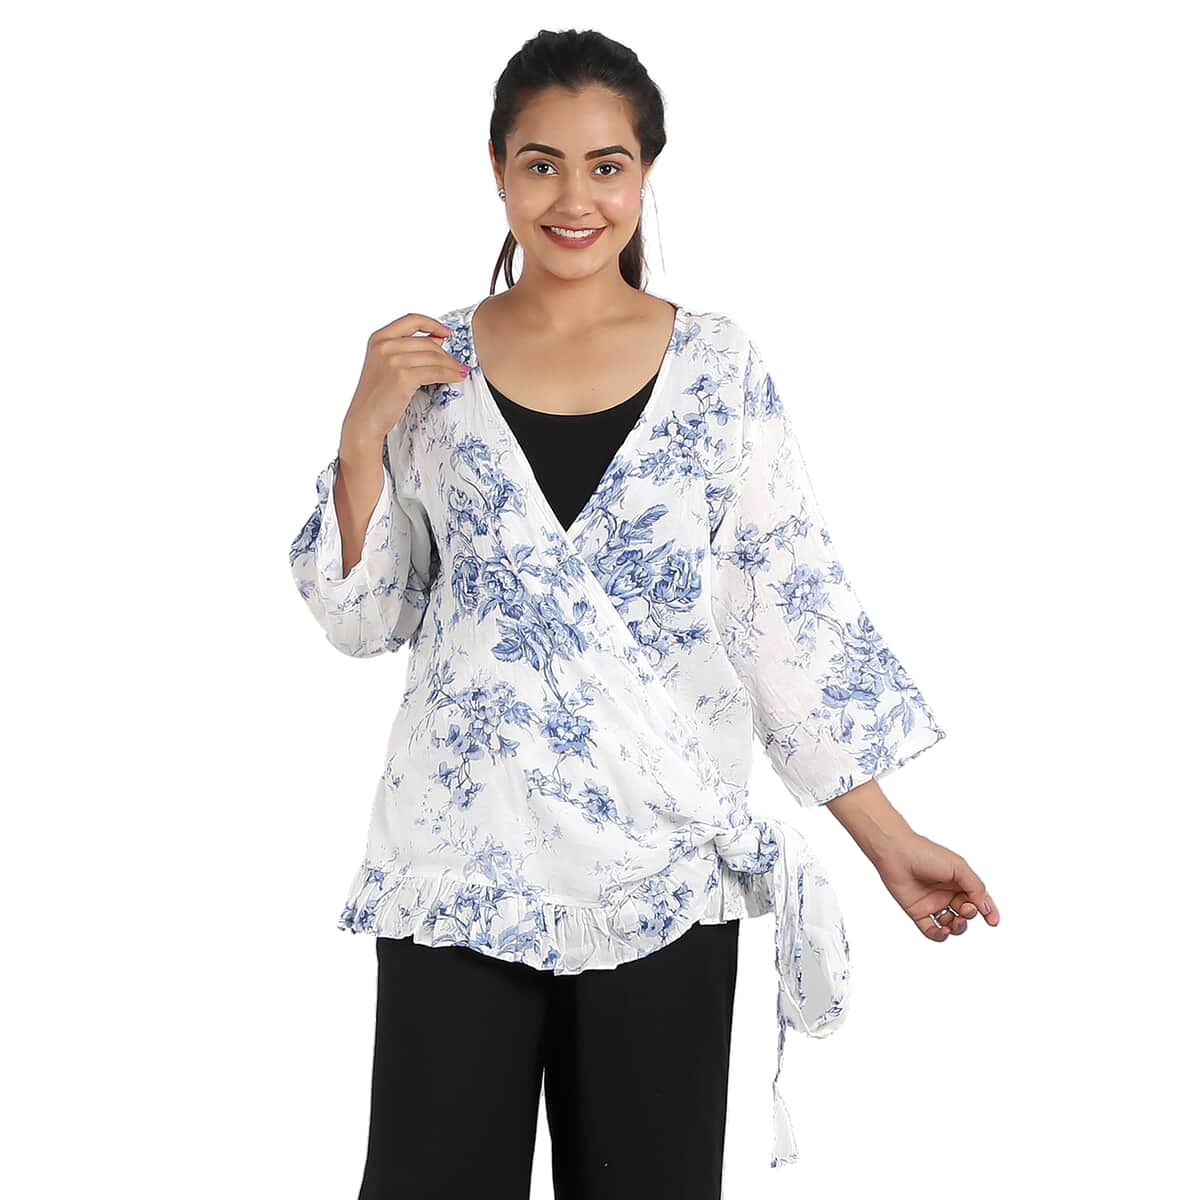 JOVIE Blue Floral Cotton Gauze Wrap Blouse with Frill Trim - One Size Missy (26.25"x23.5") image number 0